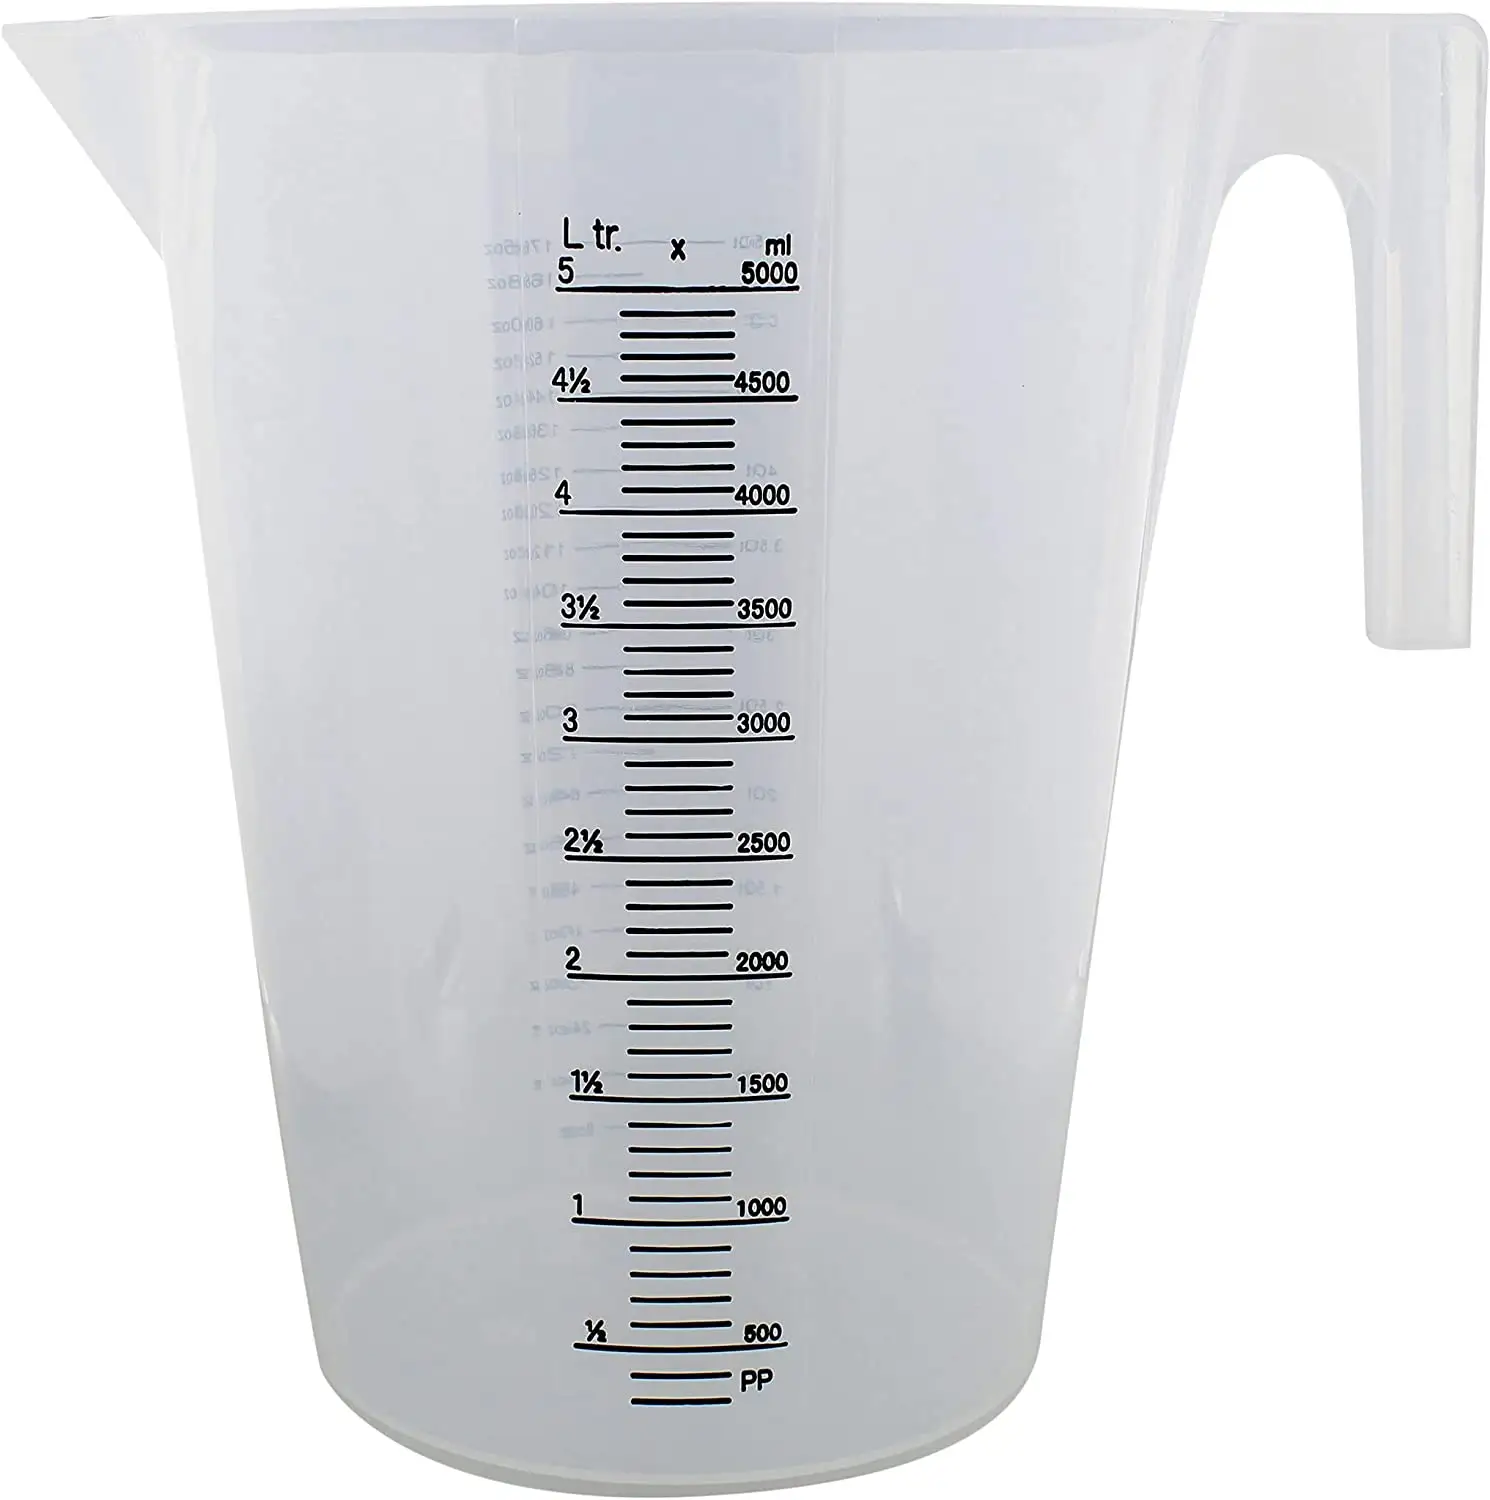 5 Liter Plastic Bucket for Painters  5000mL 3000ml  2000ml Large Graduated Measuring Container Set Paint Mixing Pitcher